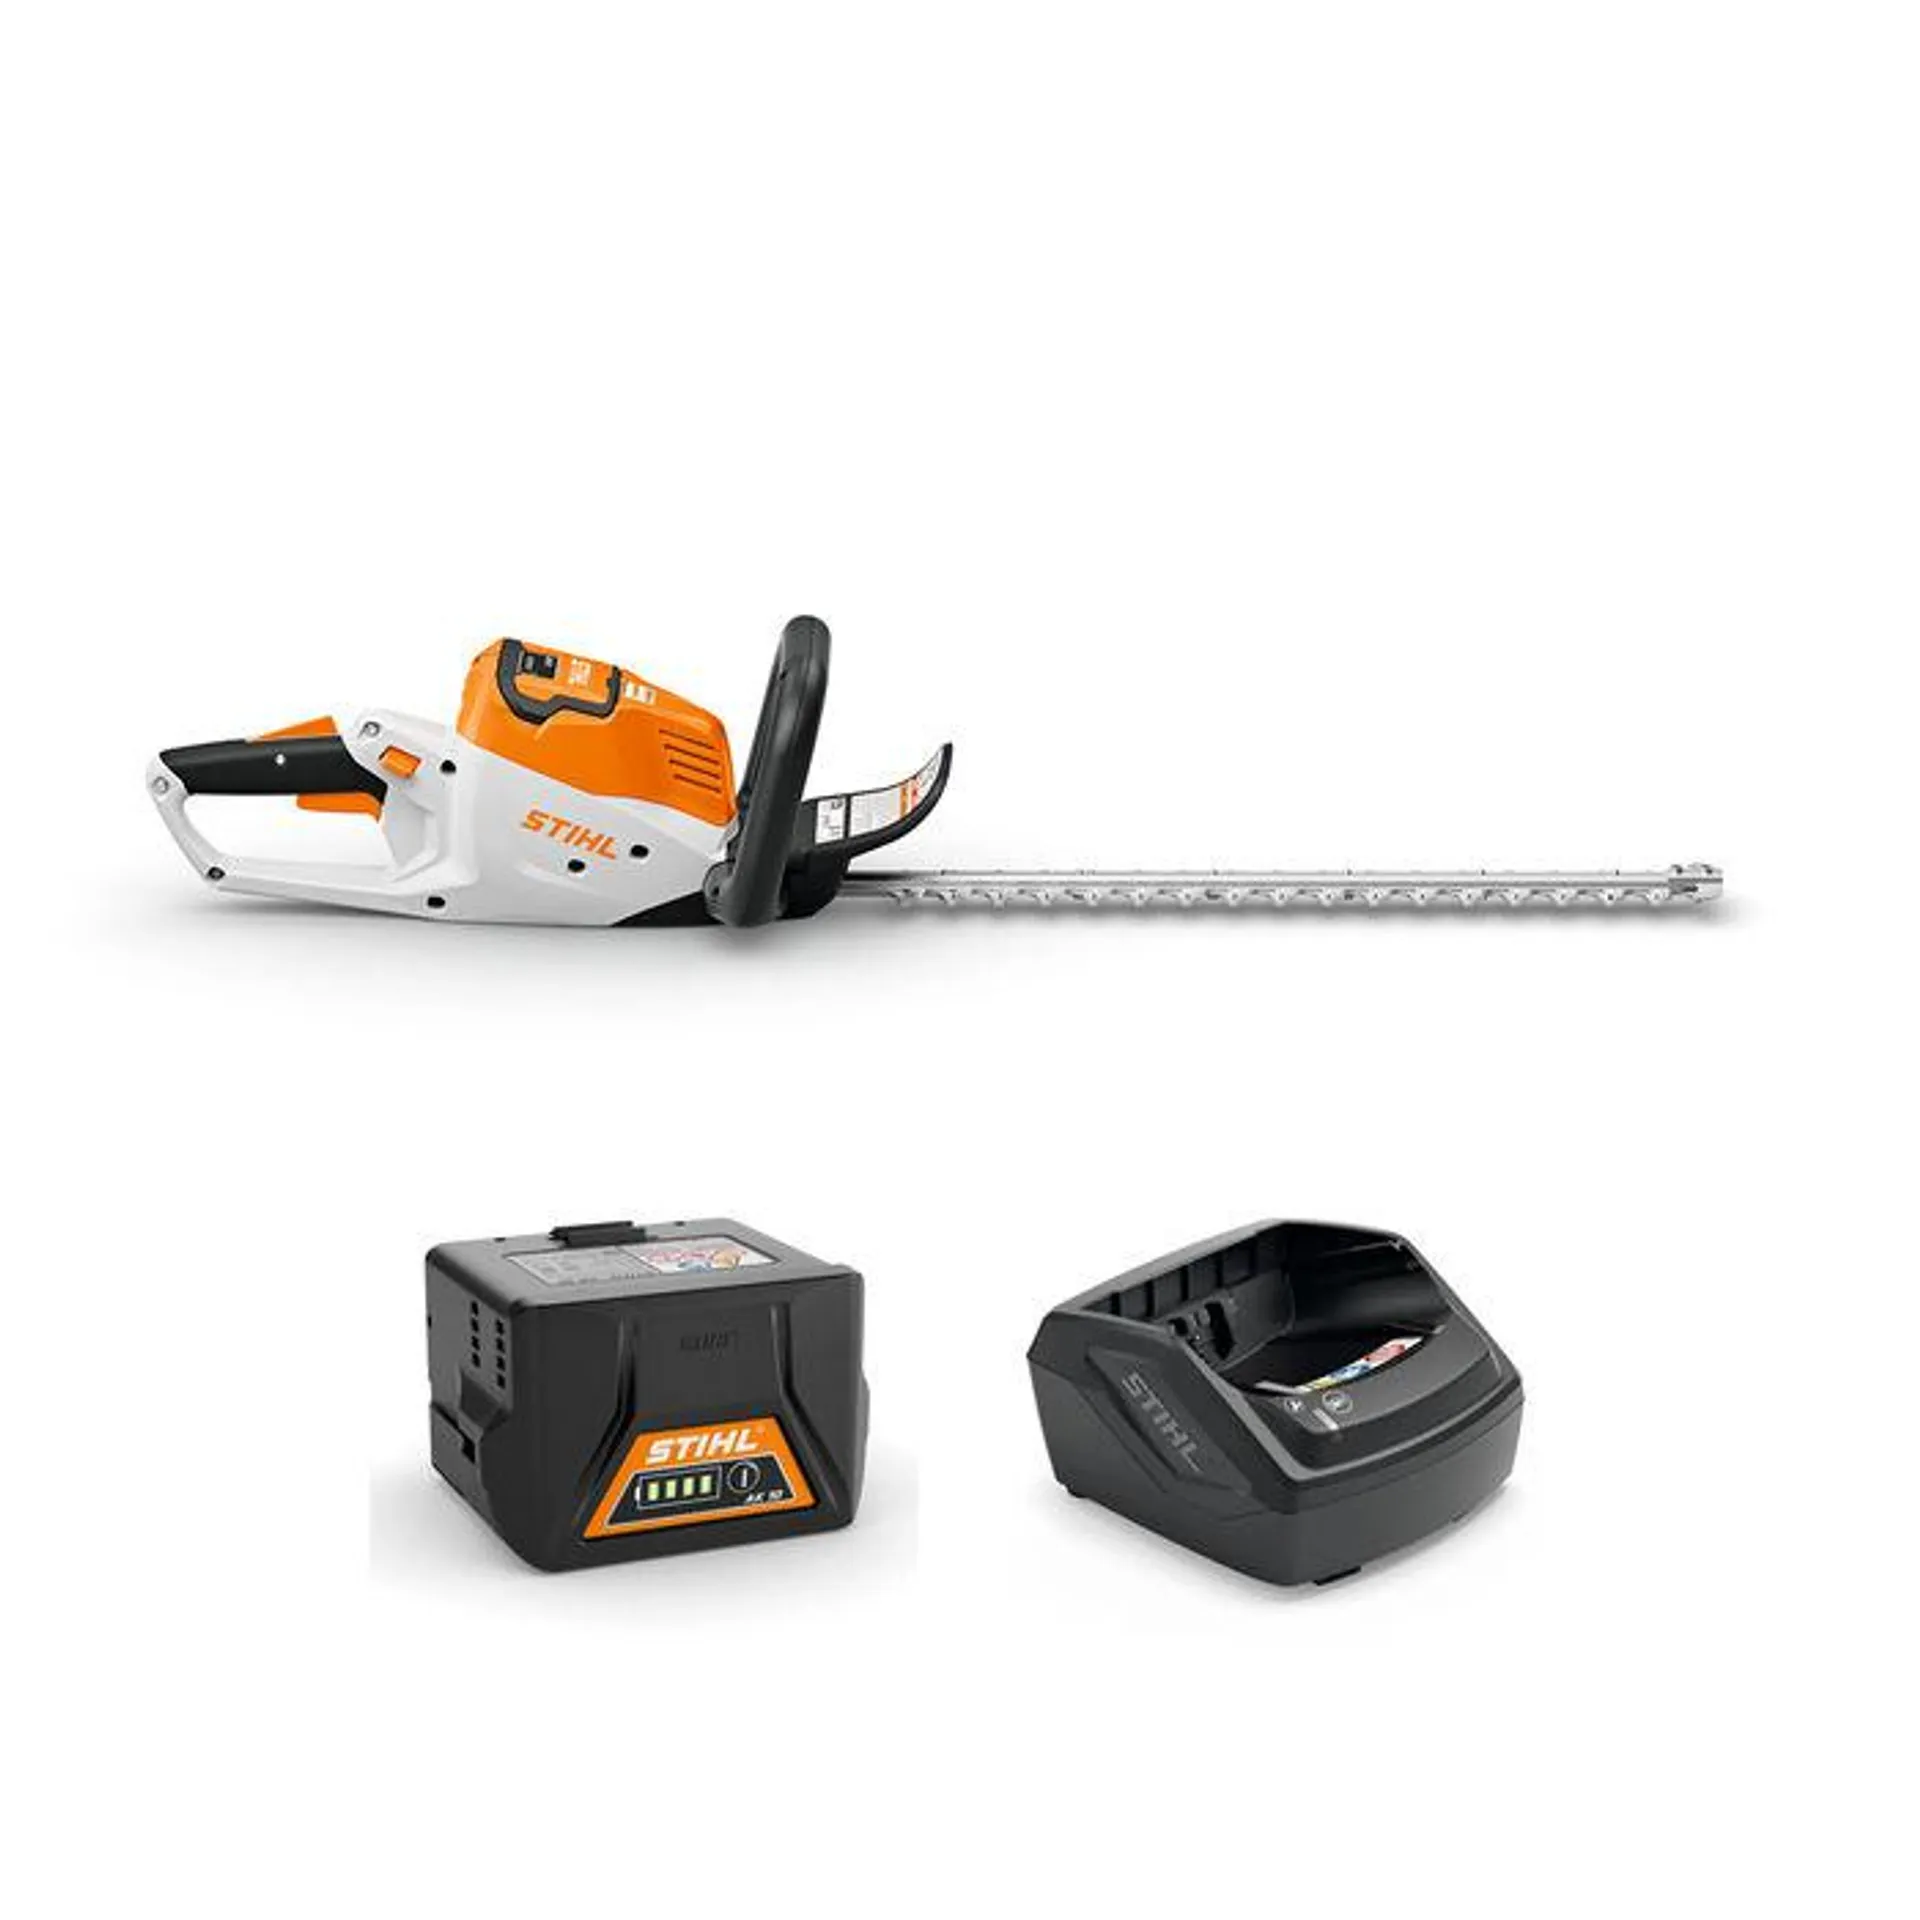 STIHL HSA 50 Battery Hedgetrimmer Kit (With Battery and Charger)